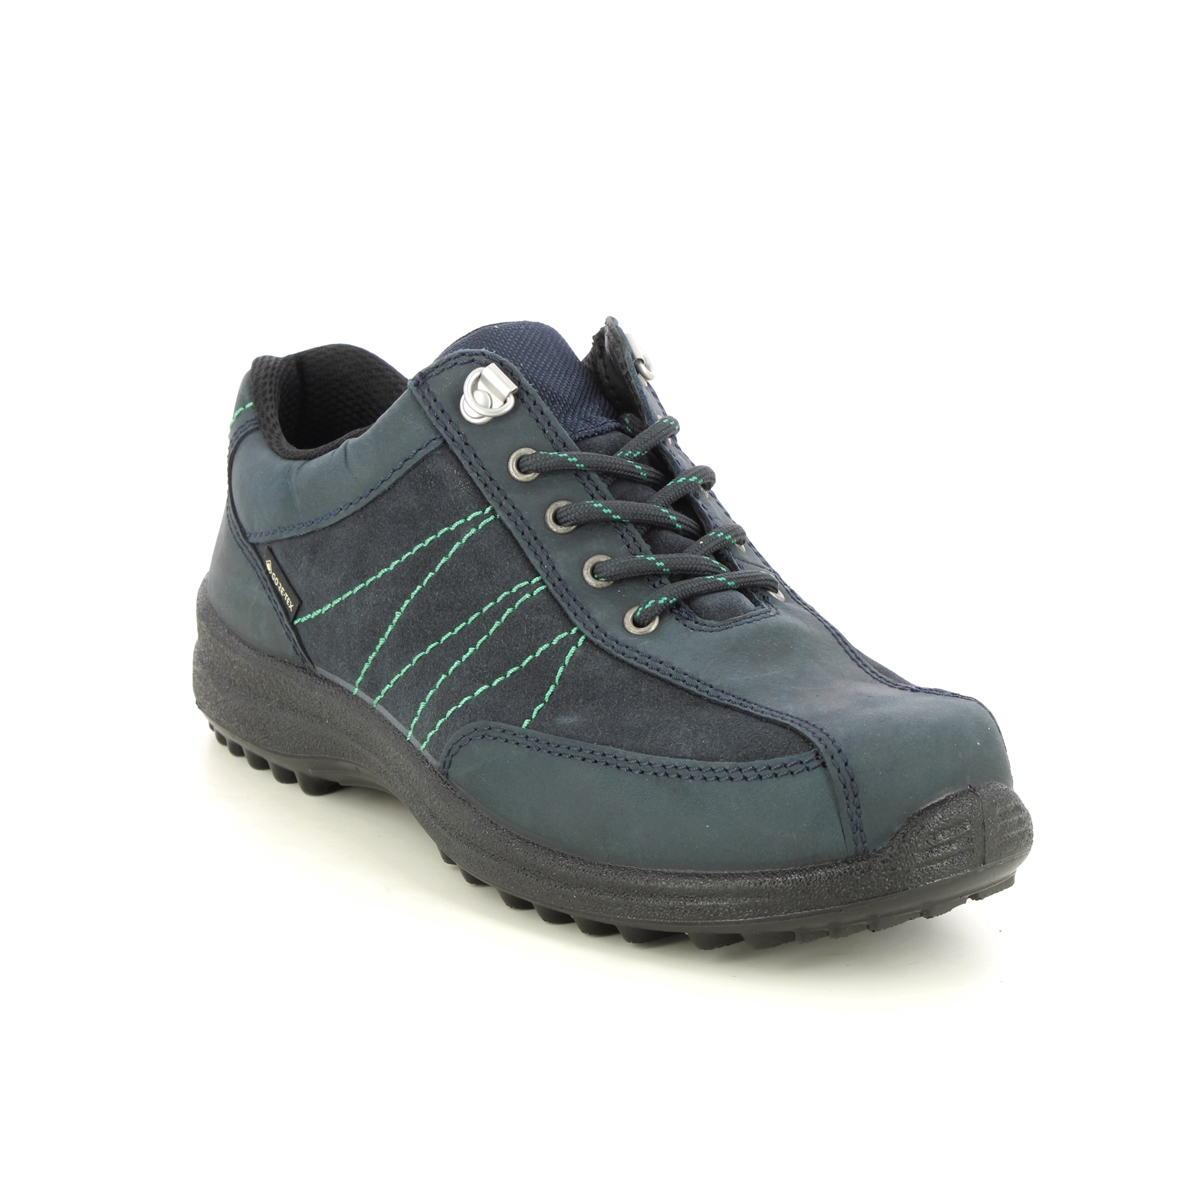 Hotter Mist Gtx Extra Wide Navy leather Womens Walking Shoes 17618-72 in a Plain Leather in Size 8